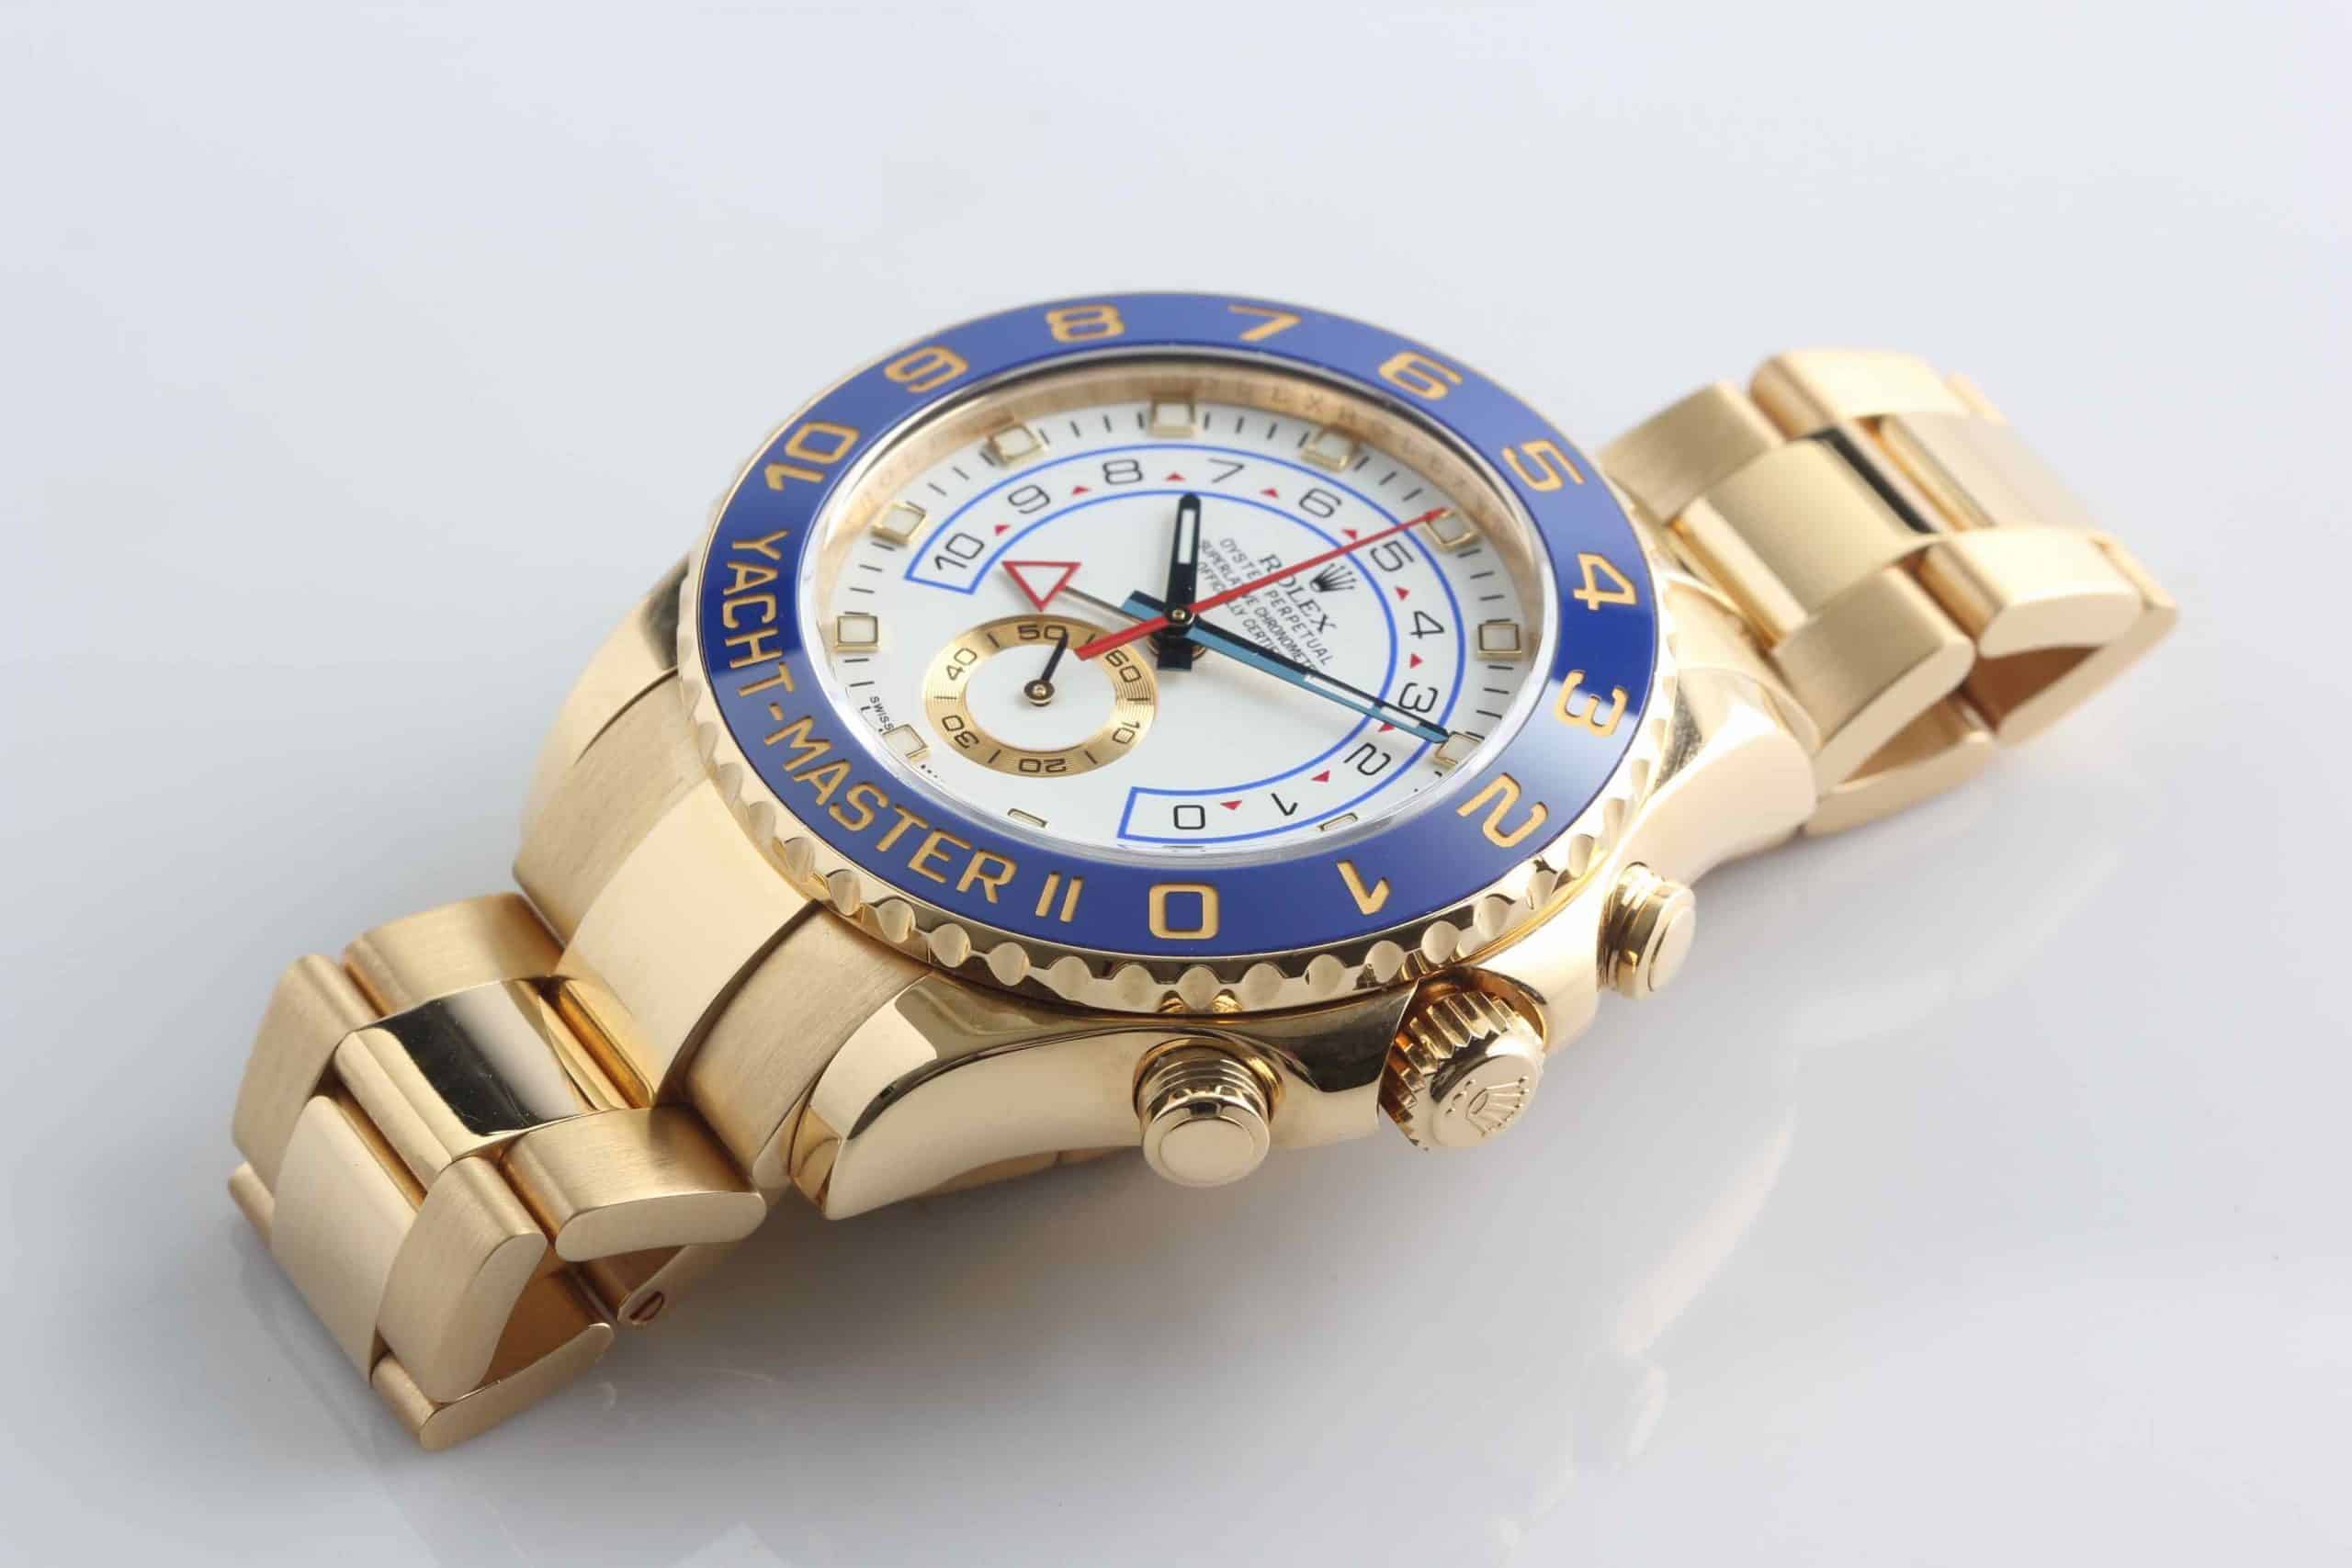 Rolex Yacht-Master II 18k - Reference 116688 - SOLD - Watch Seller